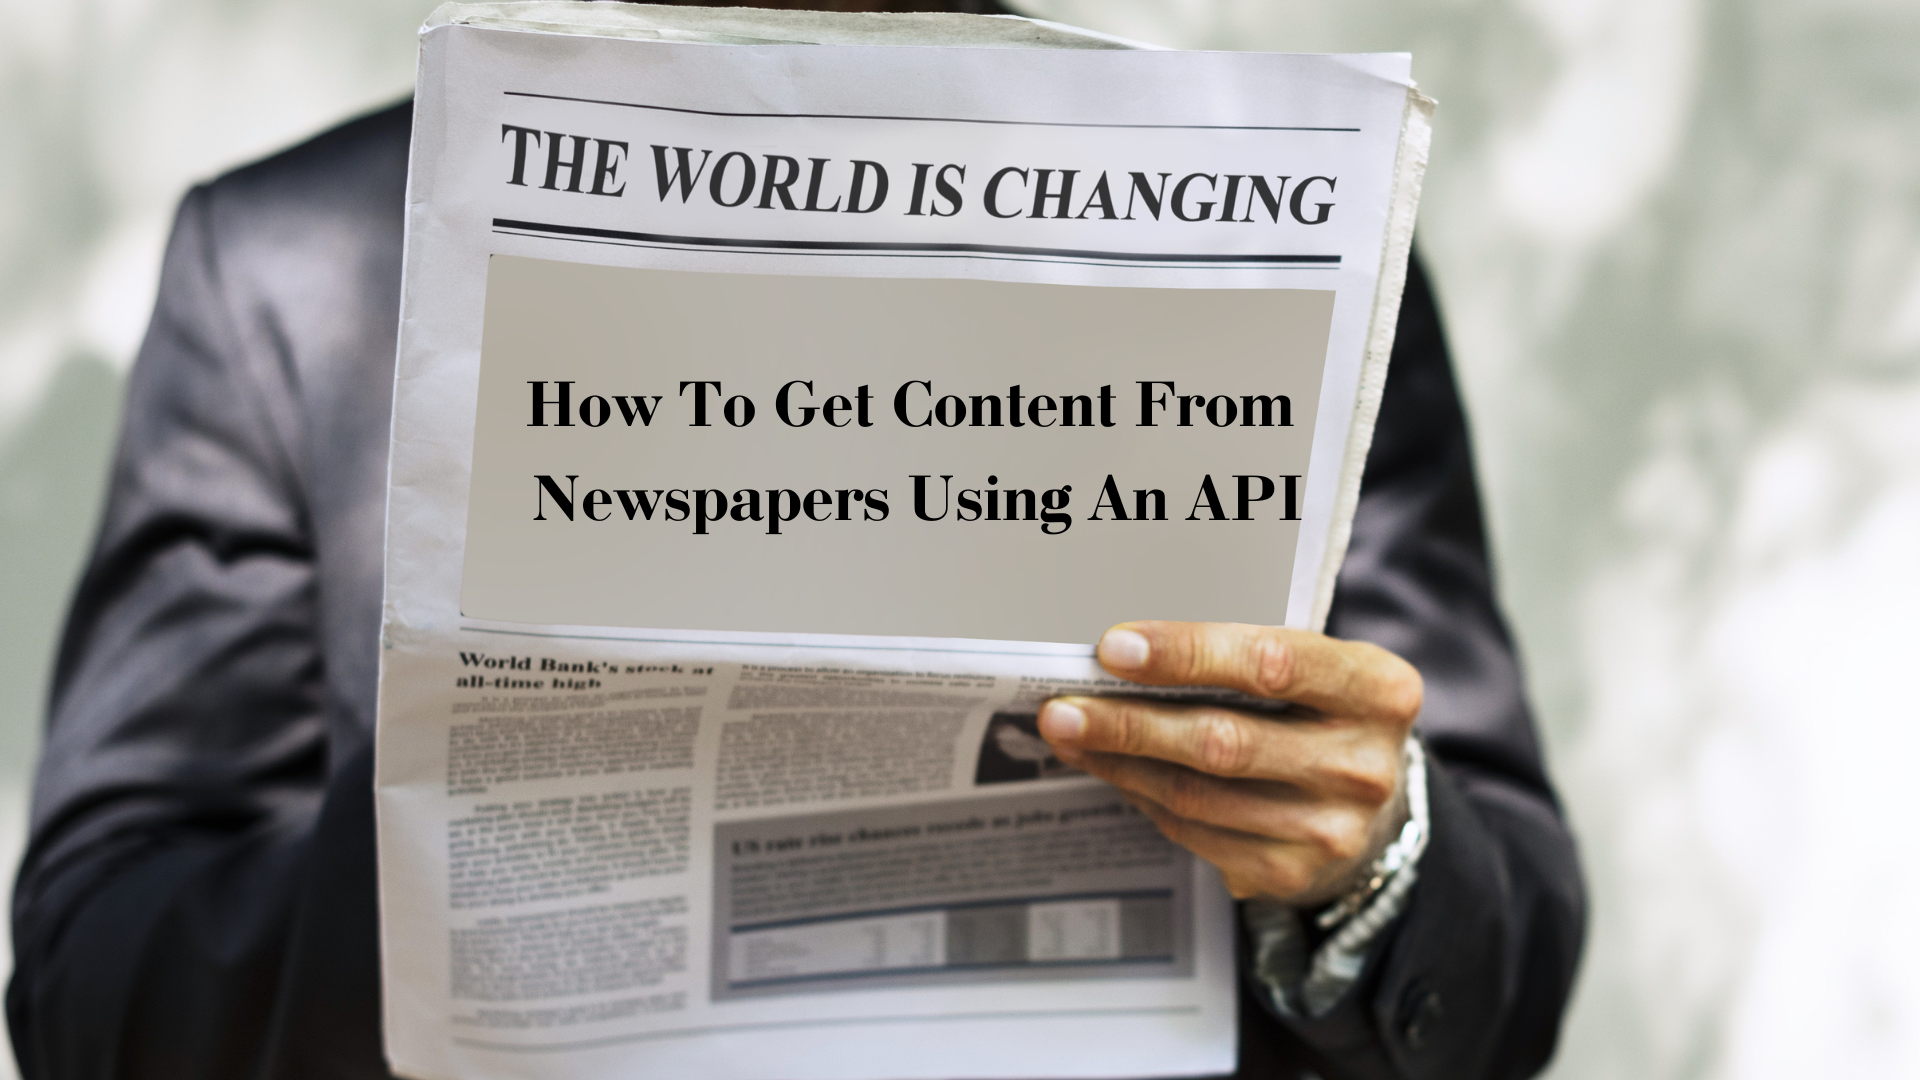 How To Get Content From Newspapers Using An API